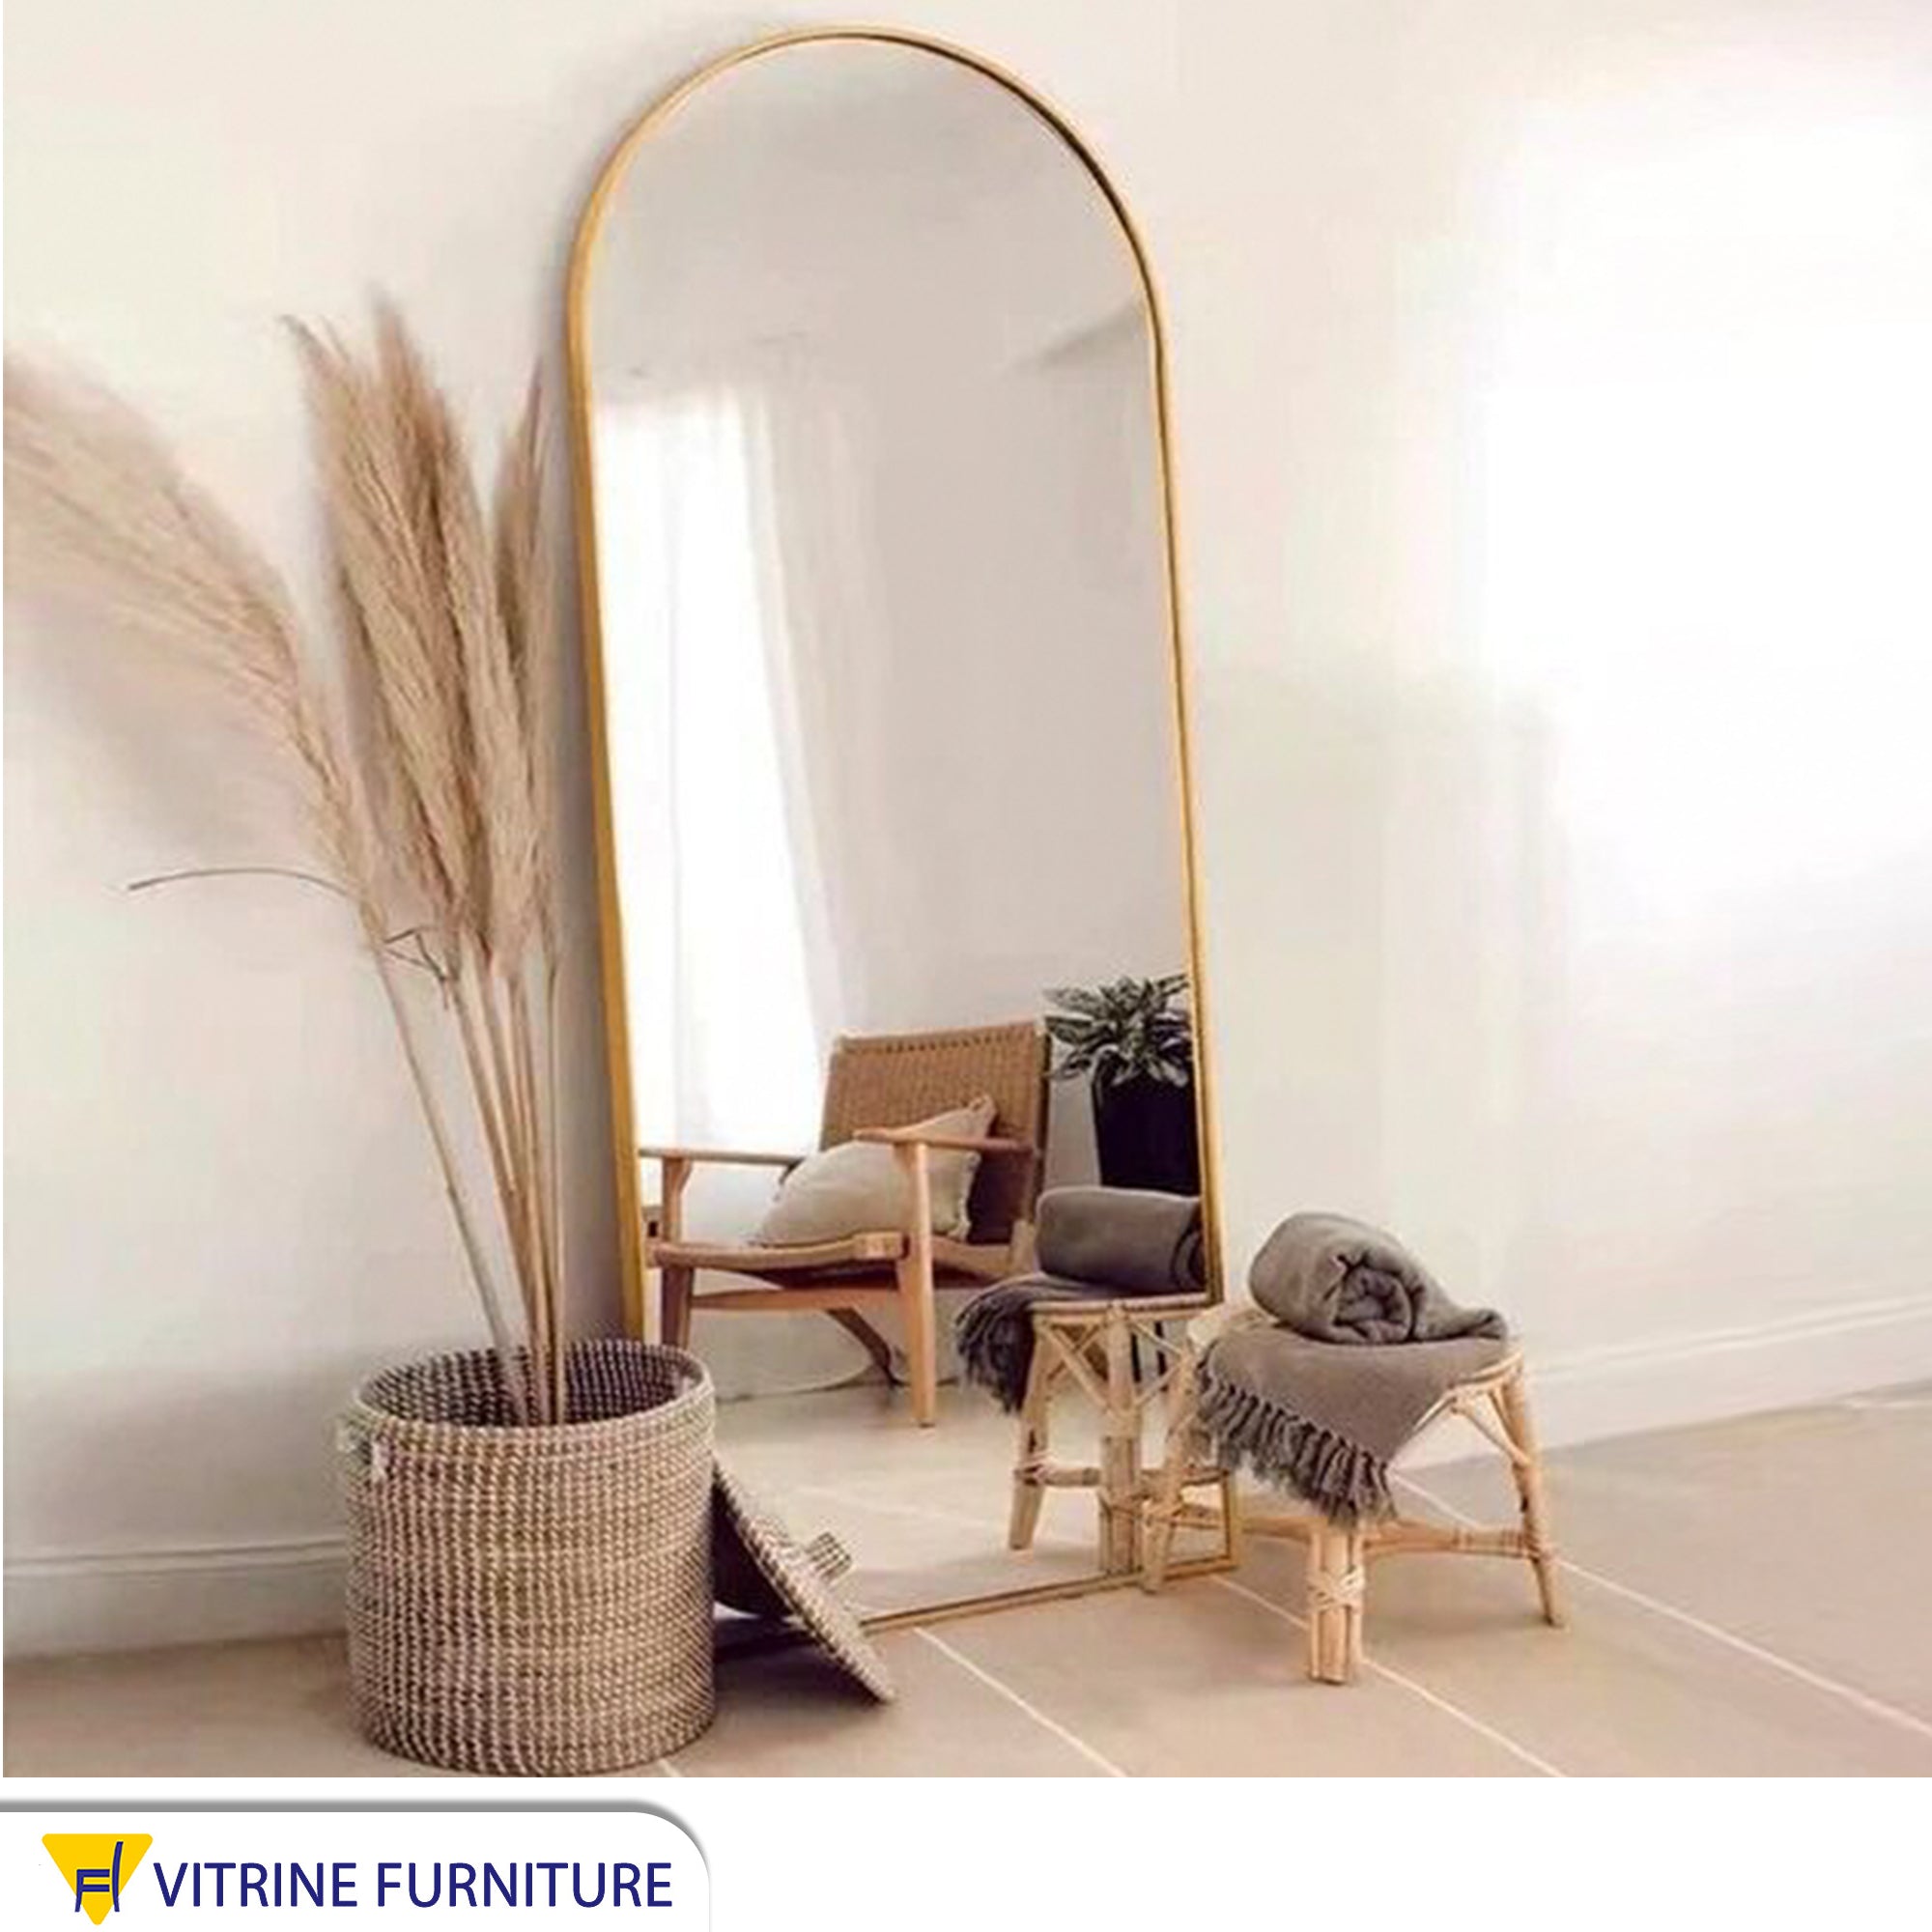 Stand mirror 70*170 with golden frame